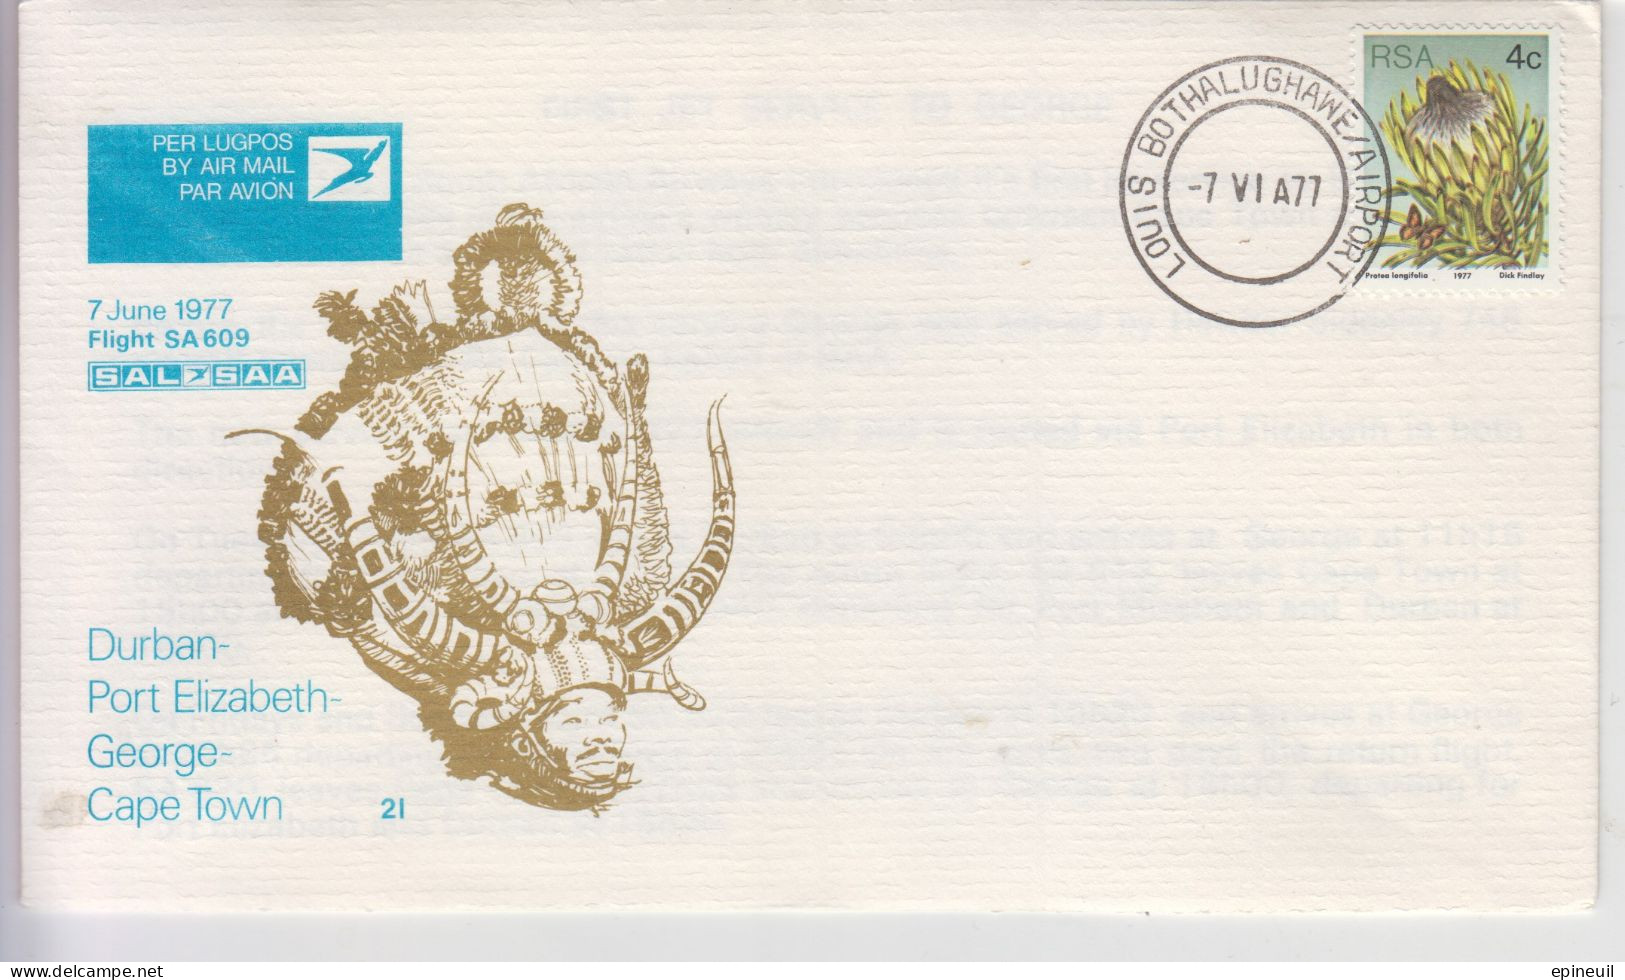 FDC -1977 - FDC